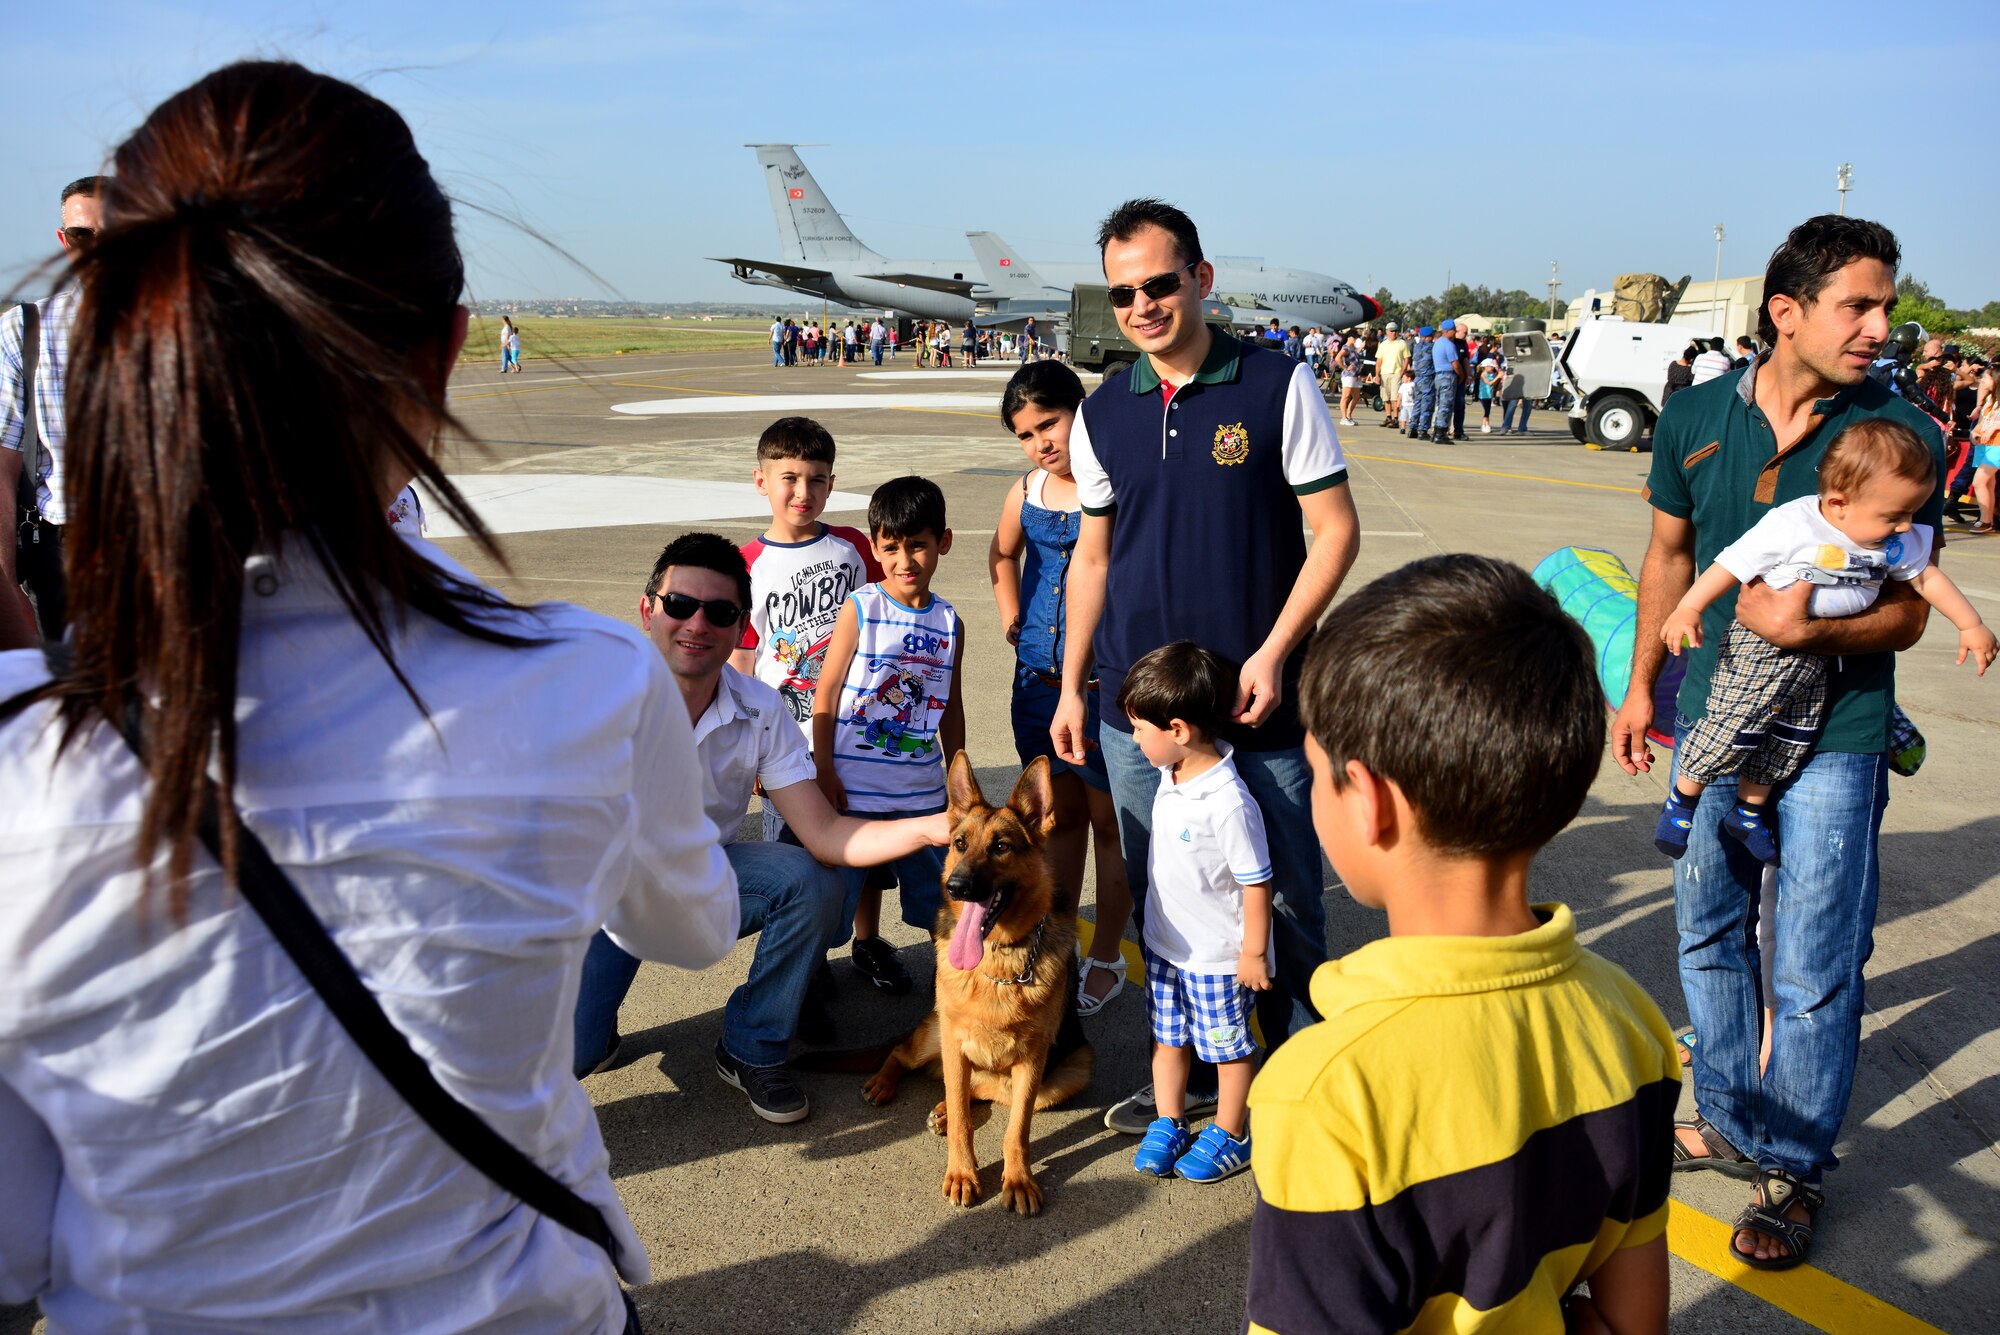 Guests attending the Turkish air force’s 102nd anniversary celebration take photographs with a Turkish military working dog June 9, 2013, at Incirlik Air Base Turkey. The working dogs were one of several displays set up to celebrate the TURAF’s anniversary. (U.S. Air Force photo by Staff Sgt. Eric Summers Jr./Released)